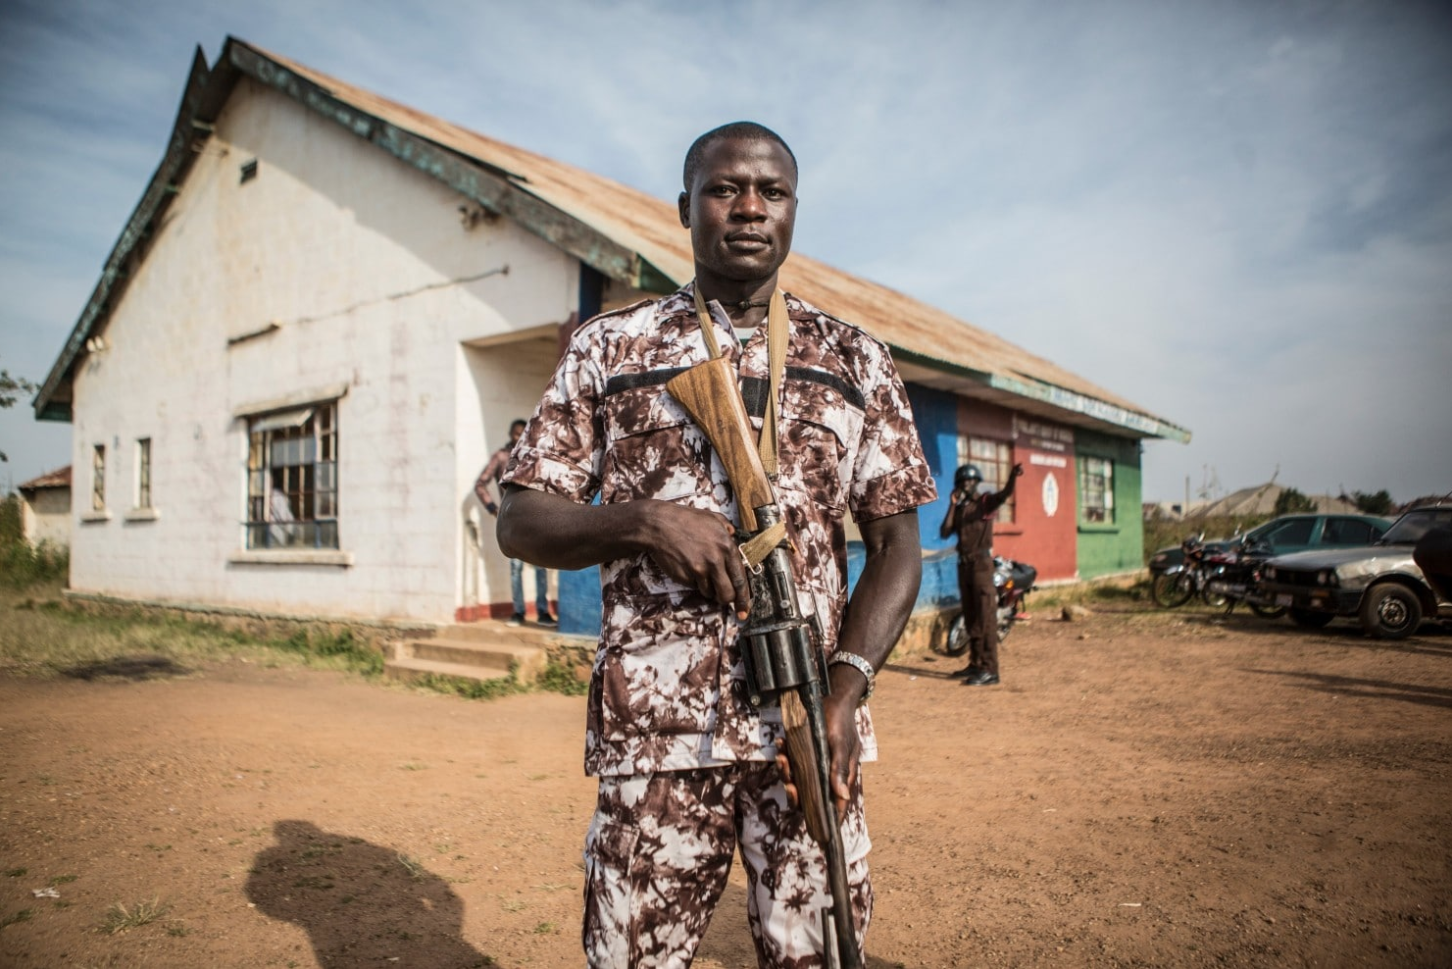 Bitrus Goting, 29, who joined the volunteer peacekeepers in Barkin Ladi in 2012, carries a homemade rifle outside the group’s headquarters. Image by Jane Hahn. Nigeria, 2018.